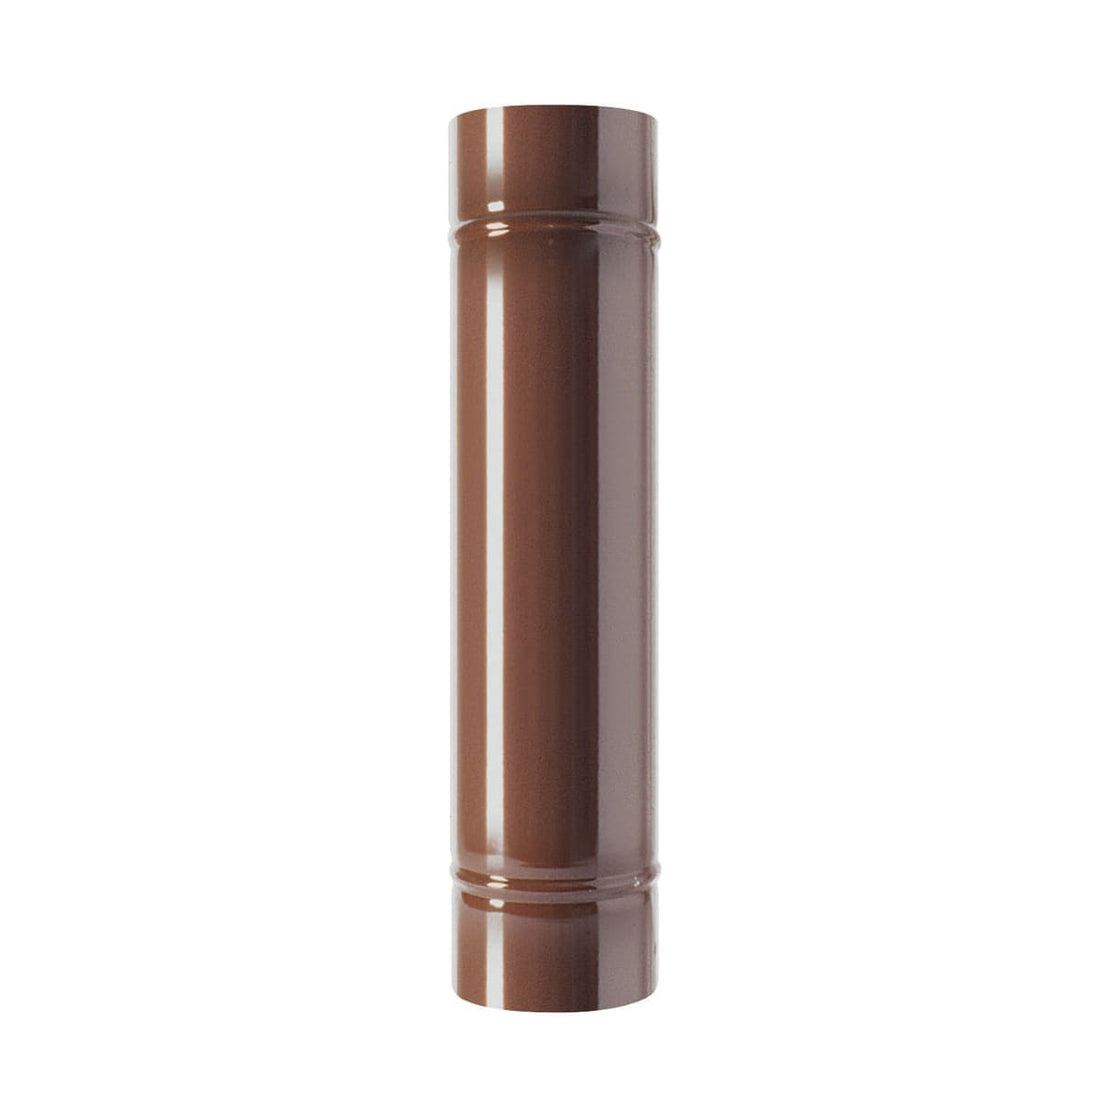 WOOD TUBE 0.5MM THICK L250 DIA120 MM ENAMELLED BROWN